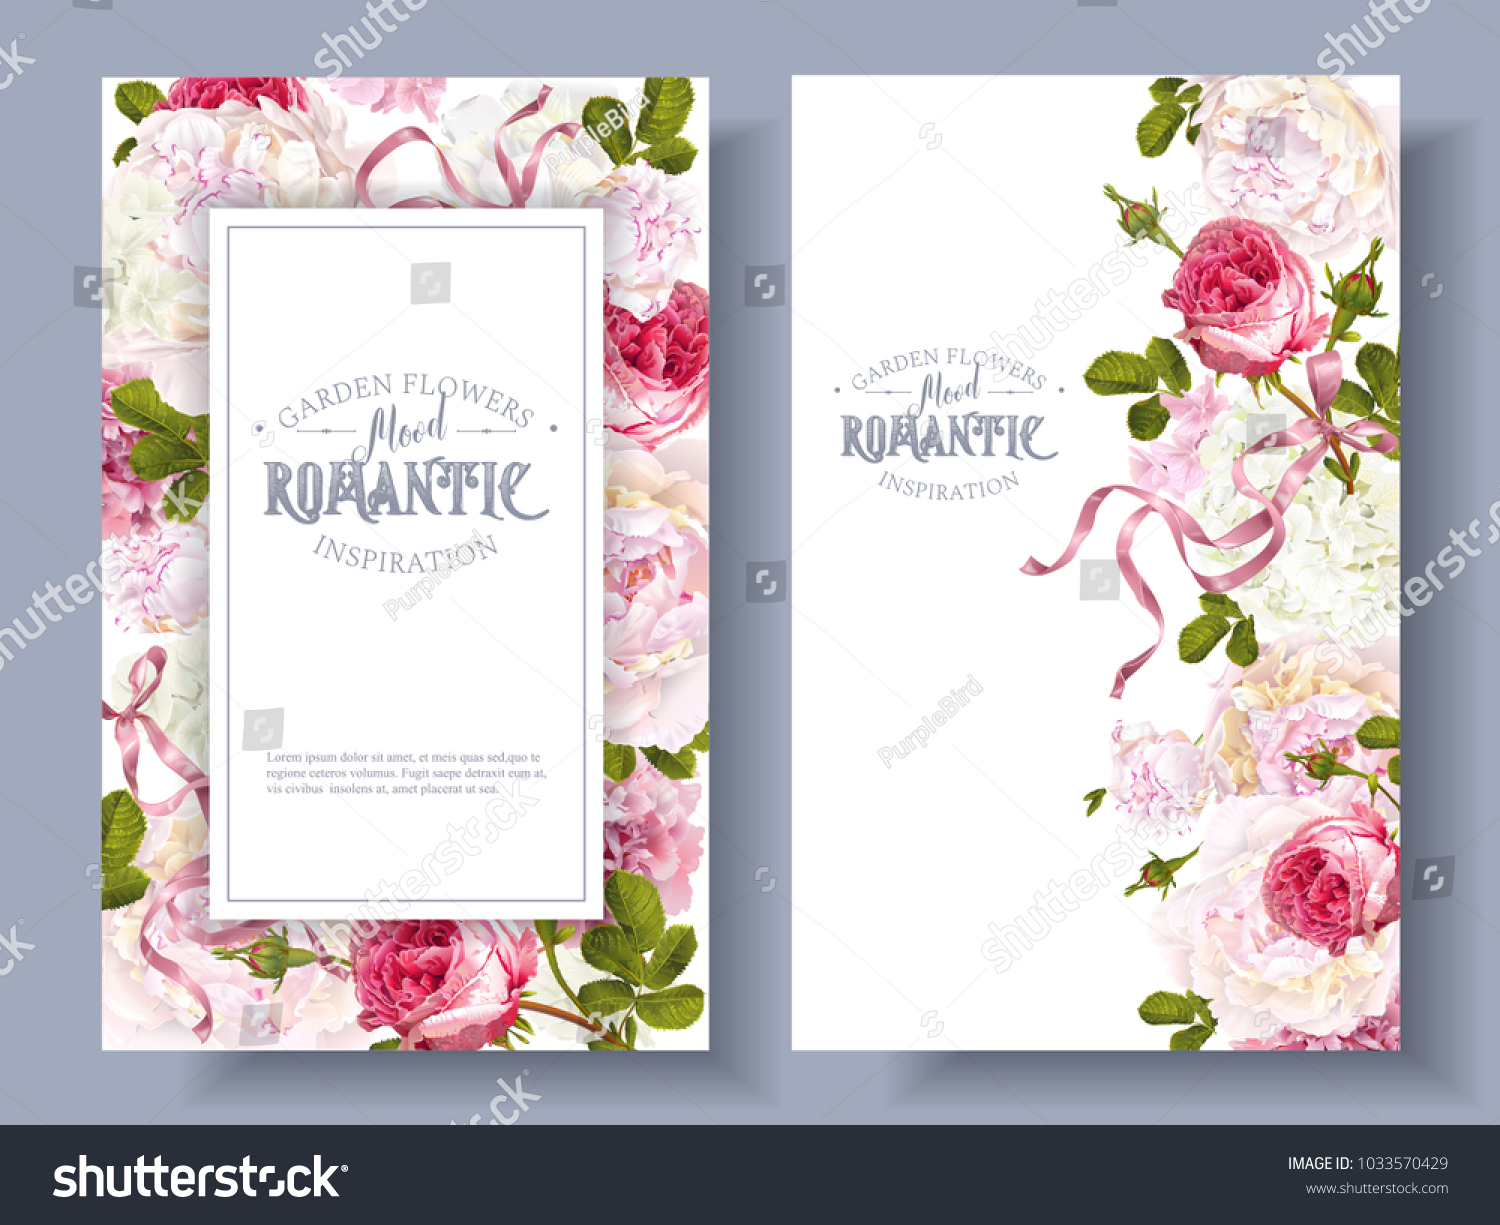 Vector vintage floral banners with peony, hydrangea, rose flowers and ribbon. Romantic design for natural cosmetics, perfume, women products. Can be used as greeting card. Best for wedding invitation #1033570429